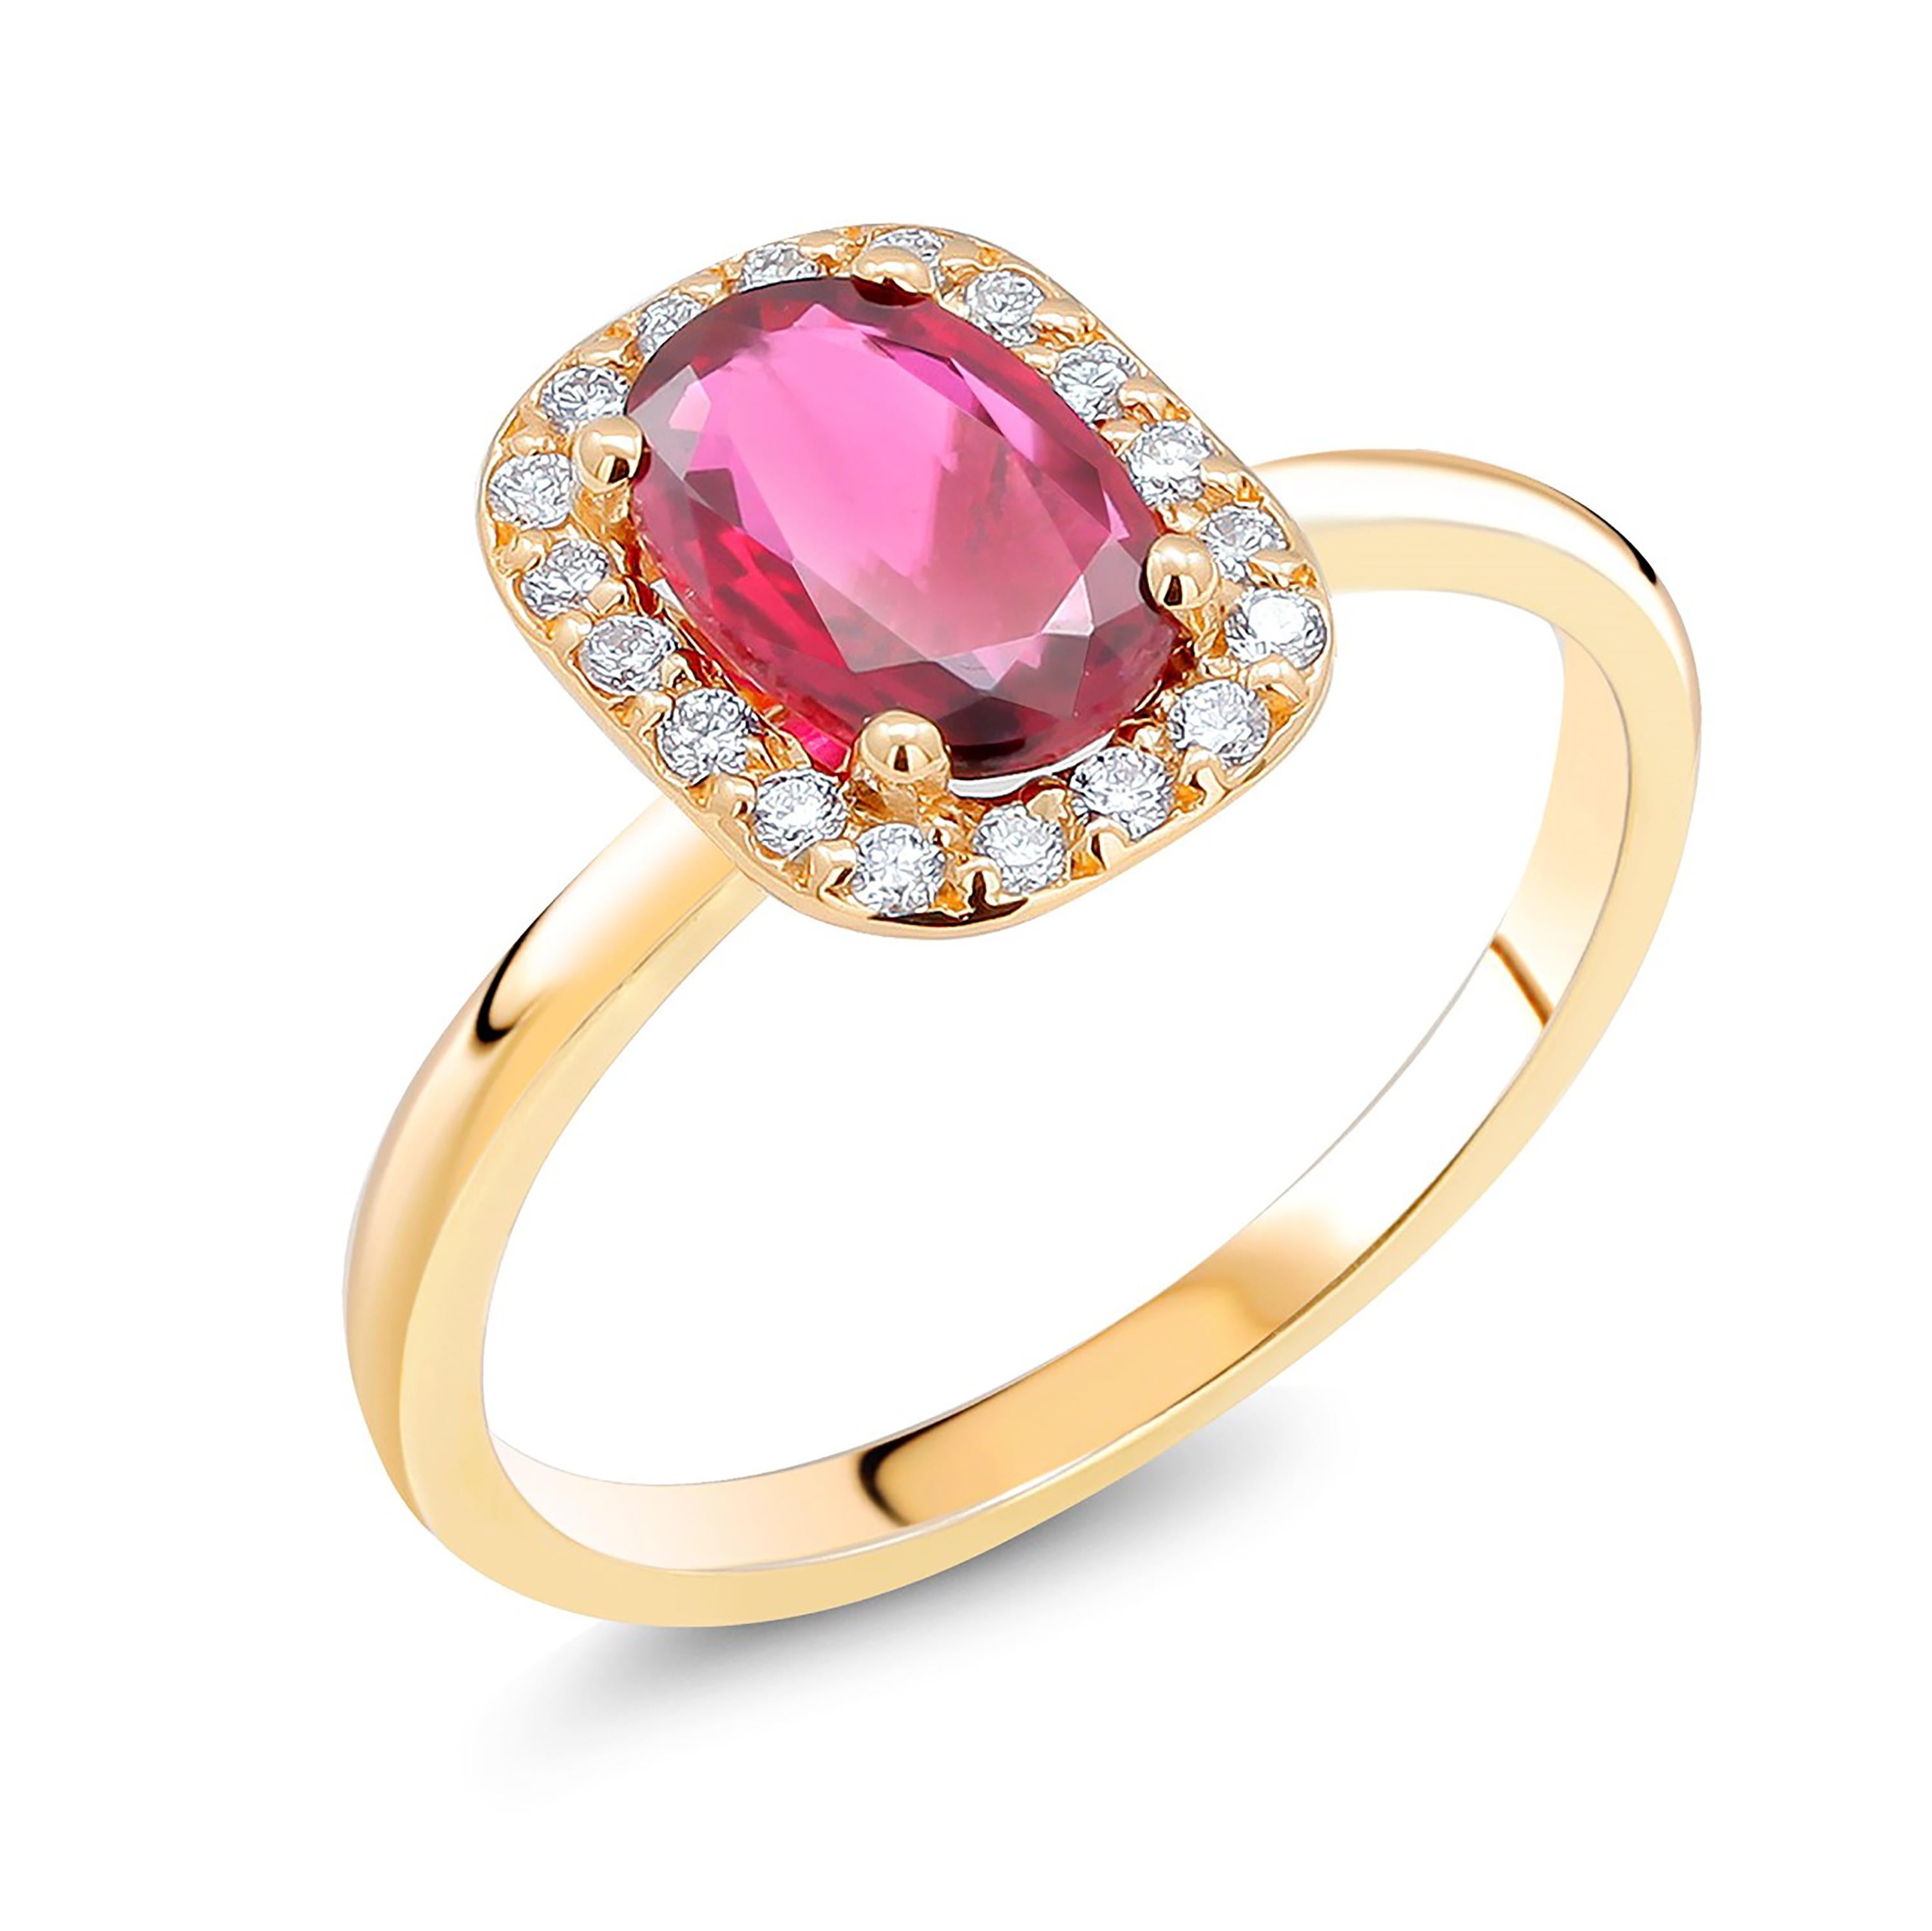 Women's Cushion Shaped Ruby and Diamonds Set in 18 Karat Yellow Gold Cocktail Ring